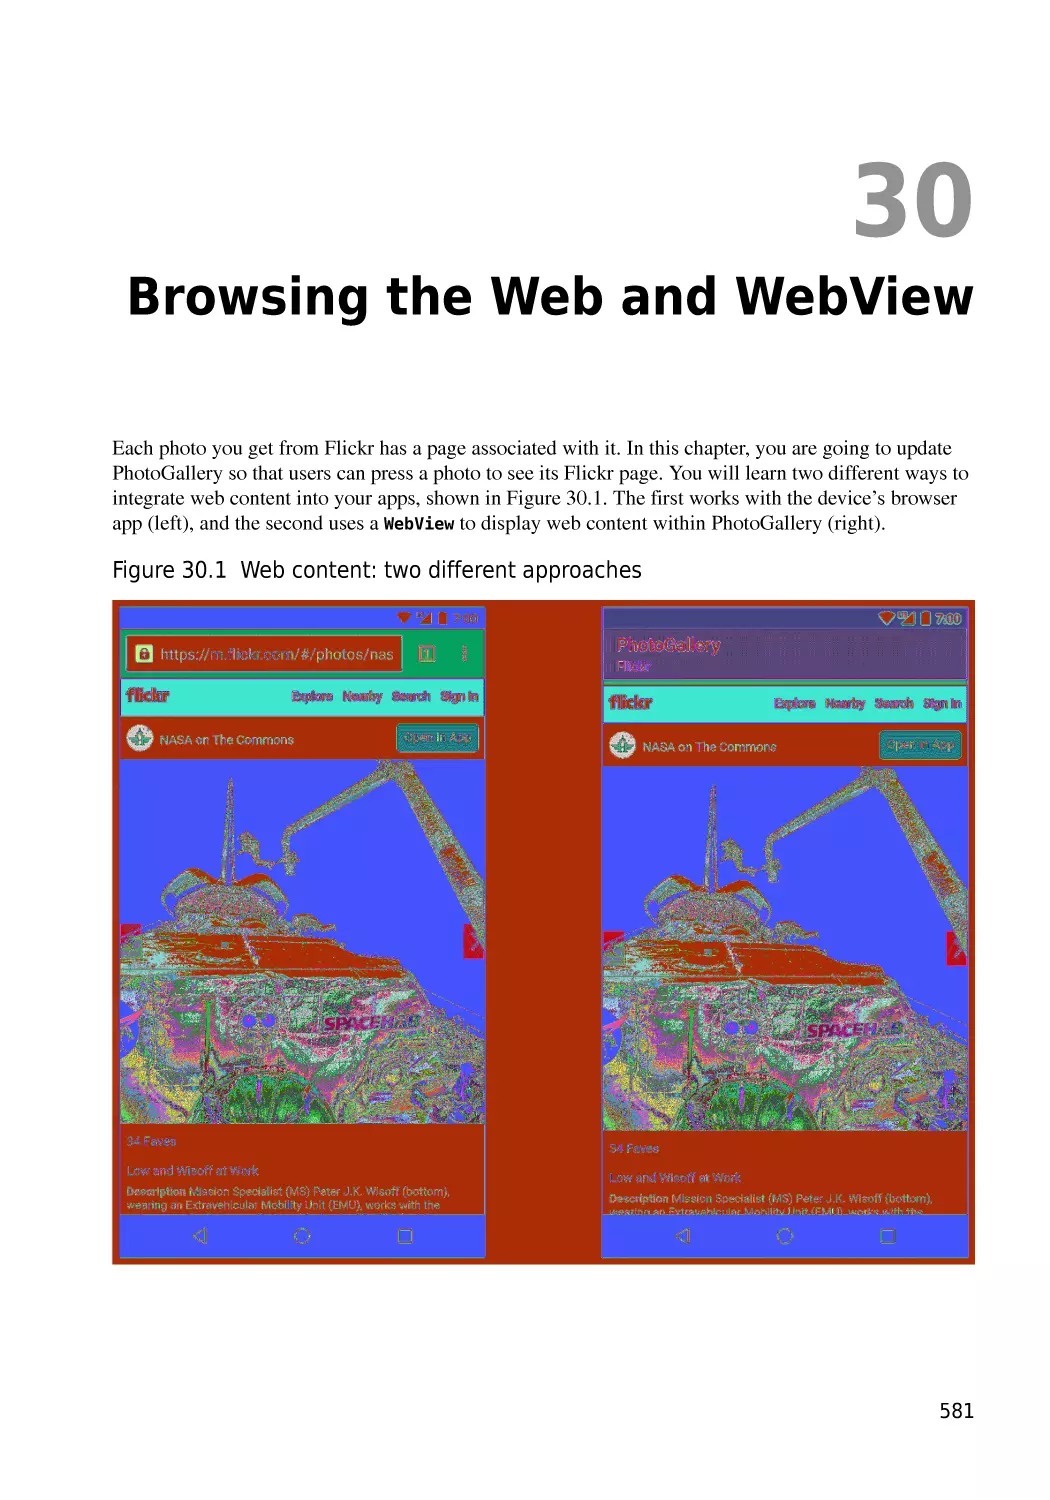 Chapter 30  Browsing the Web and WebView